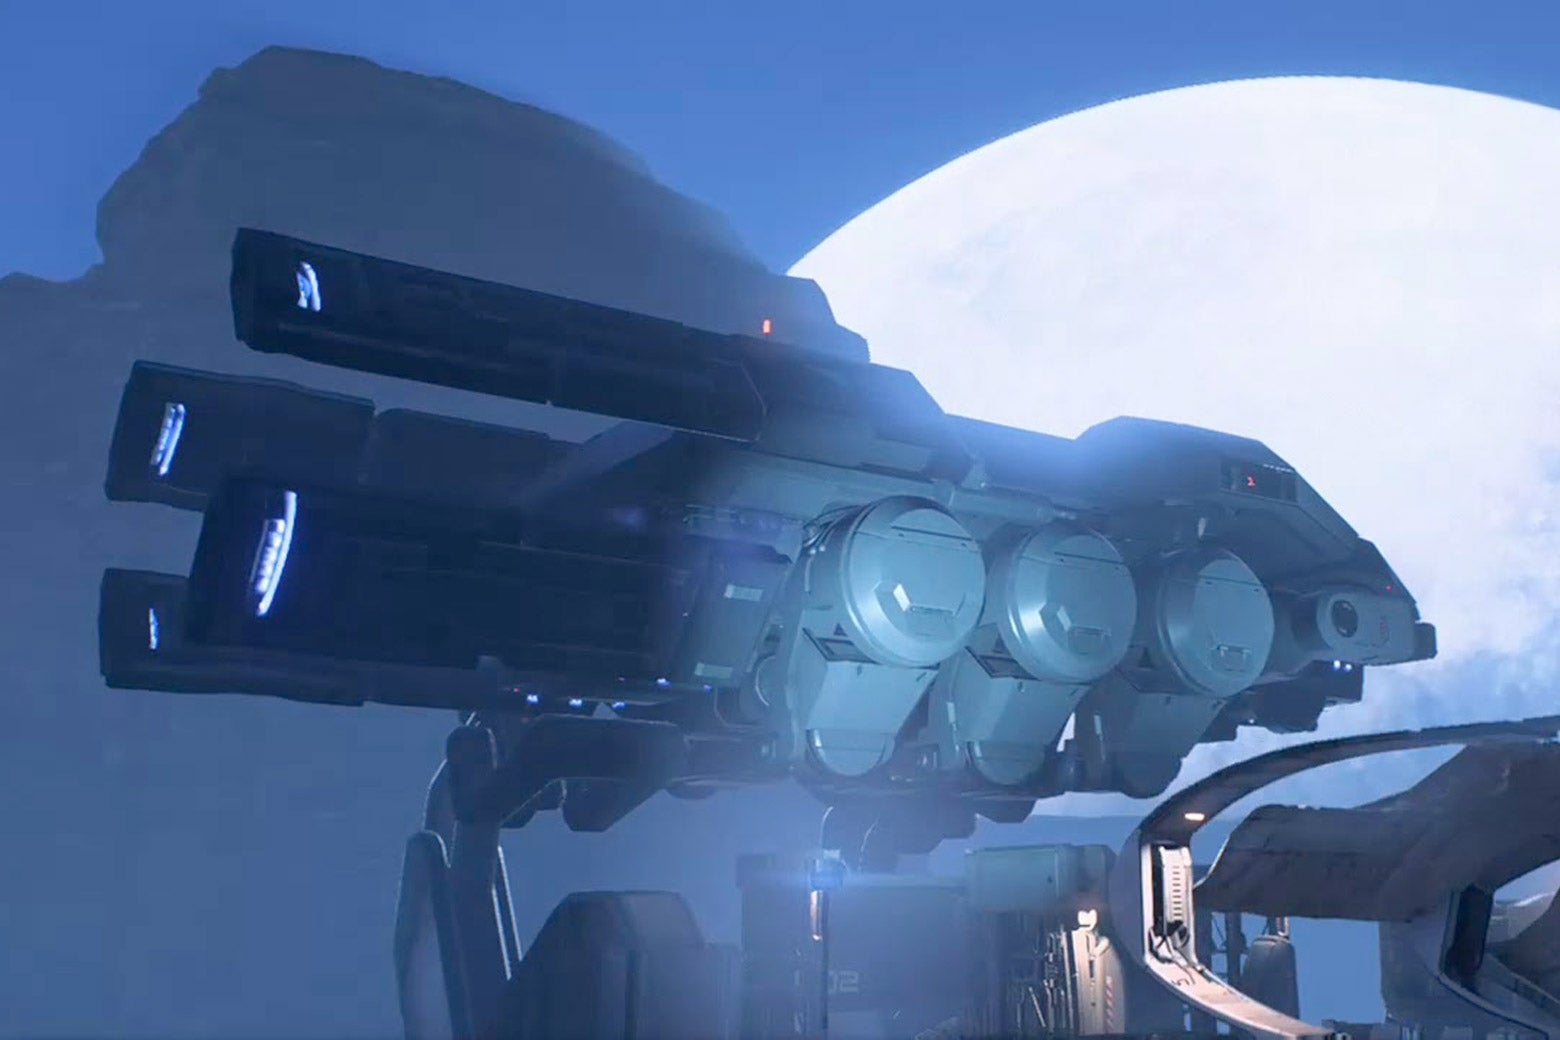 A large, futuristic space ship, with a view of what appears to be the moon in the background. 